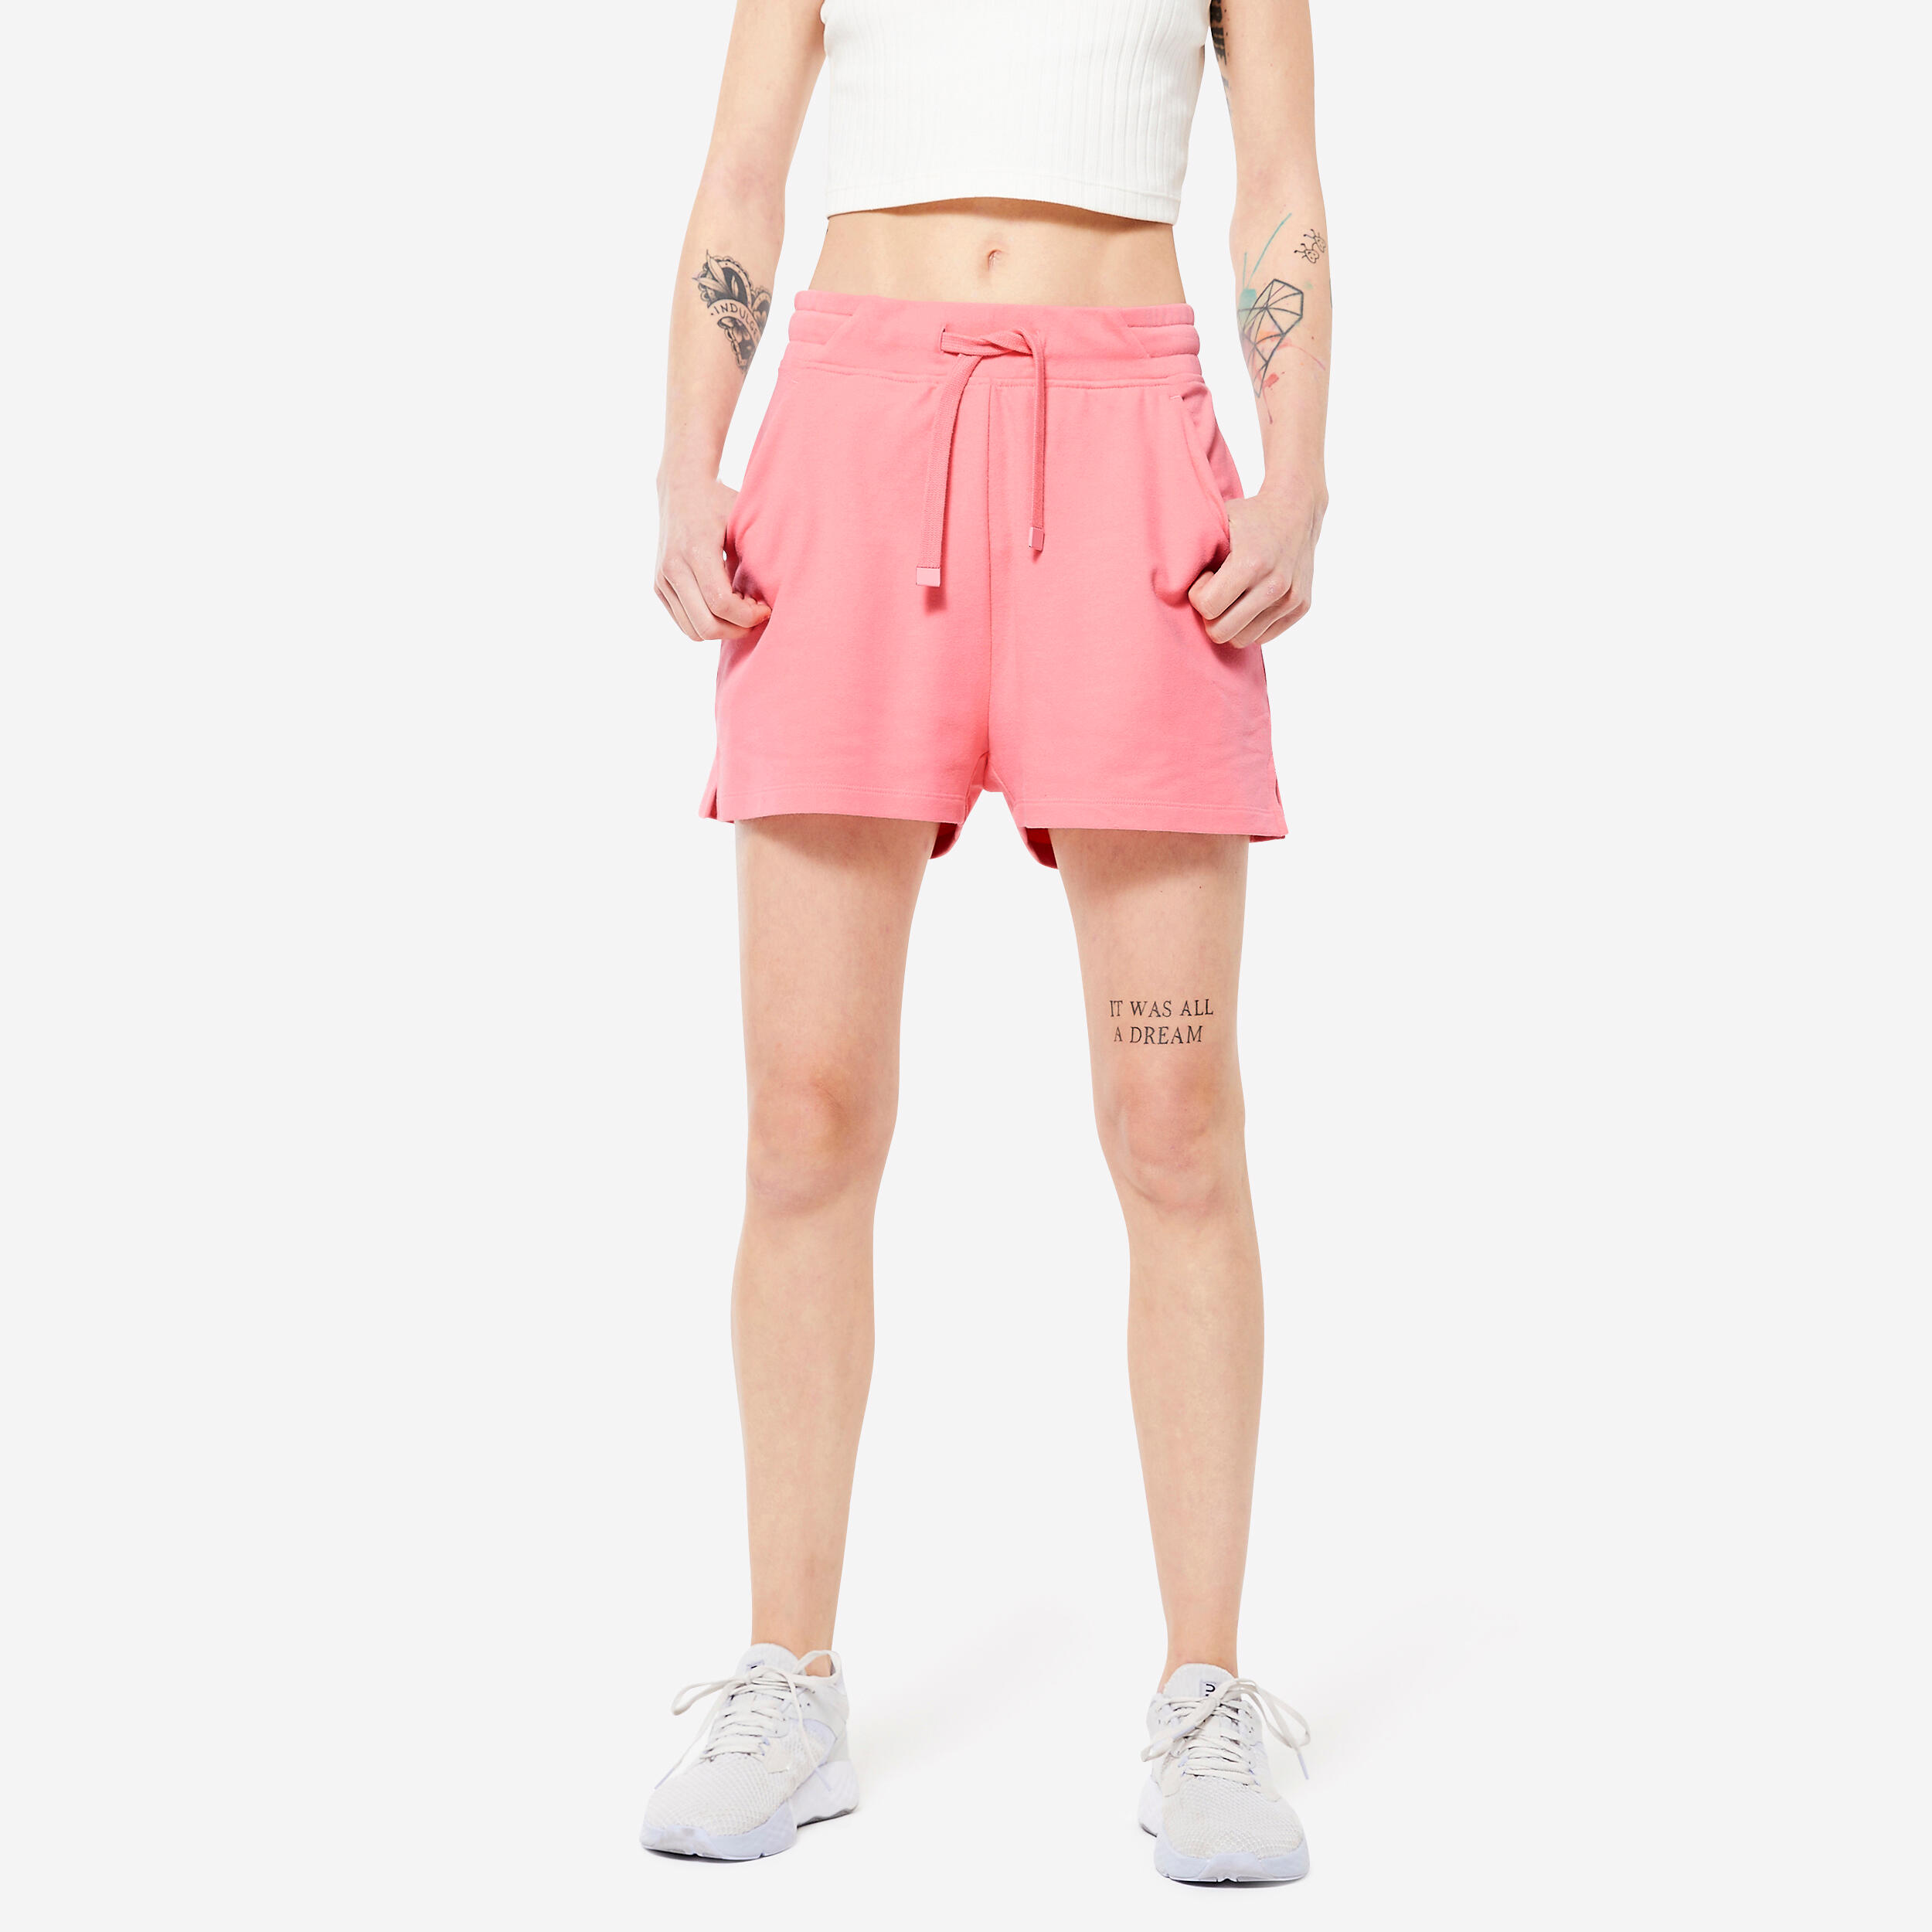 Women's Cotton Fitness Shorts with Pocket 520 - Pink Lychee 1/6